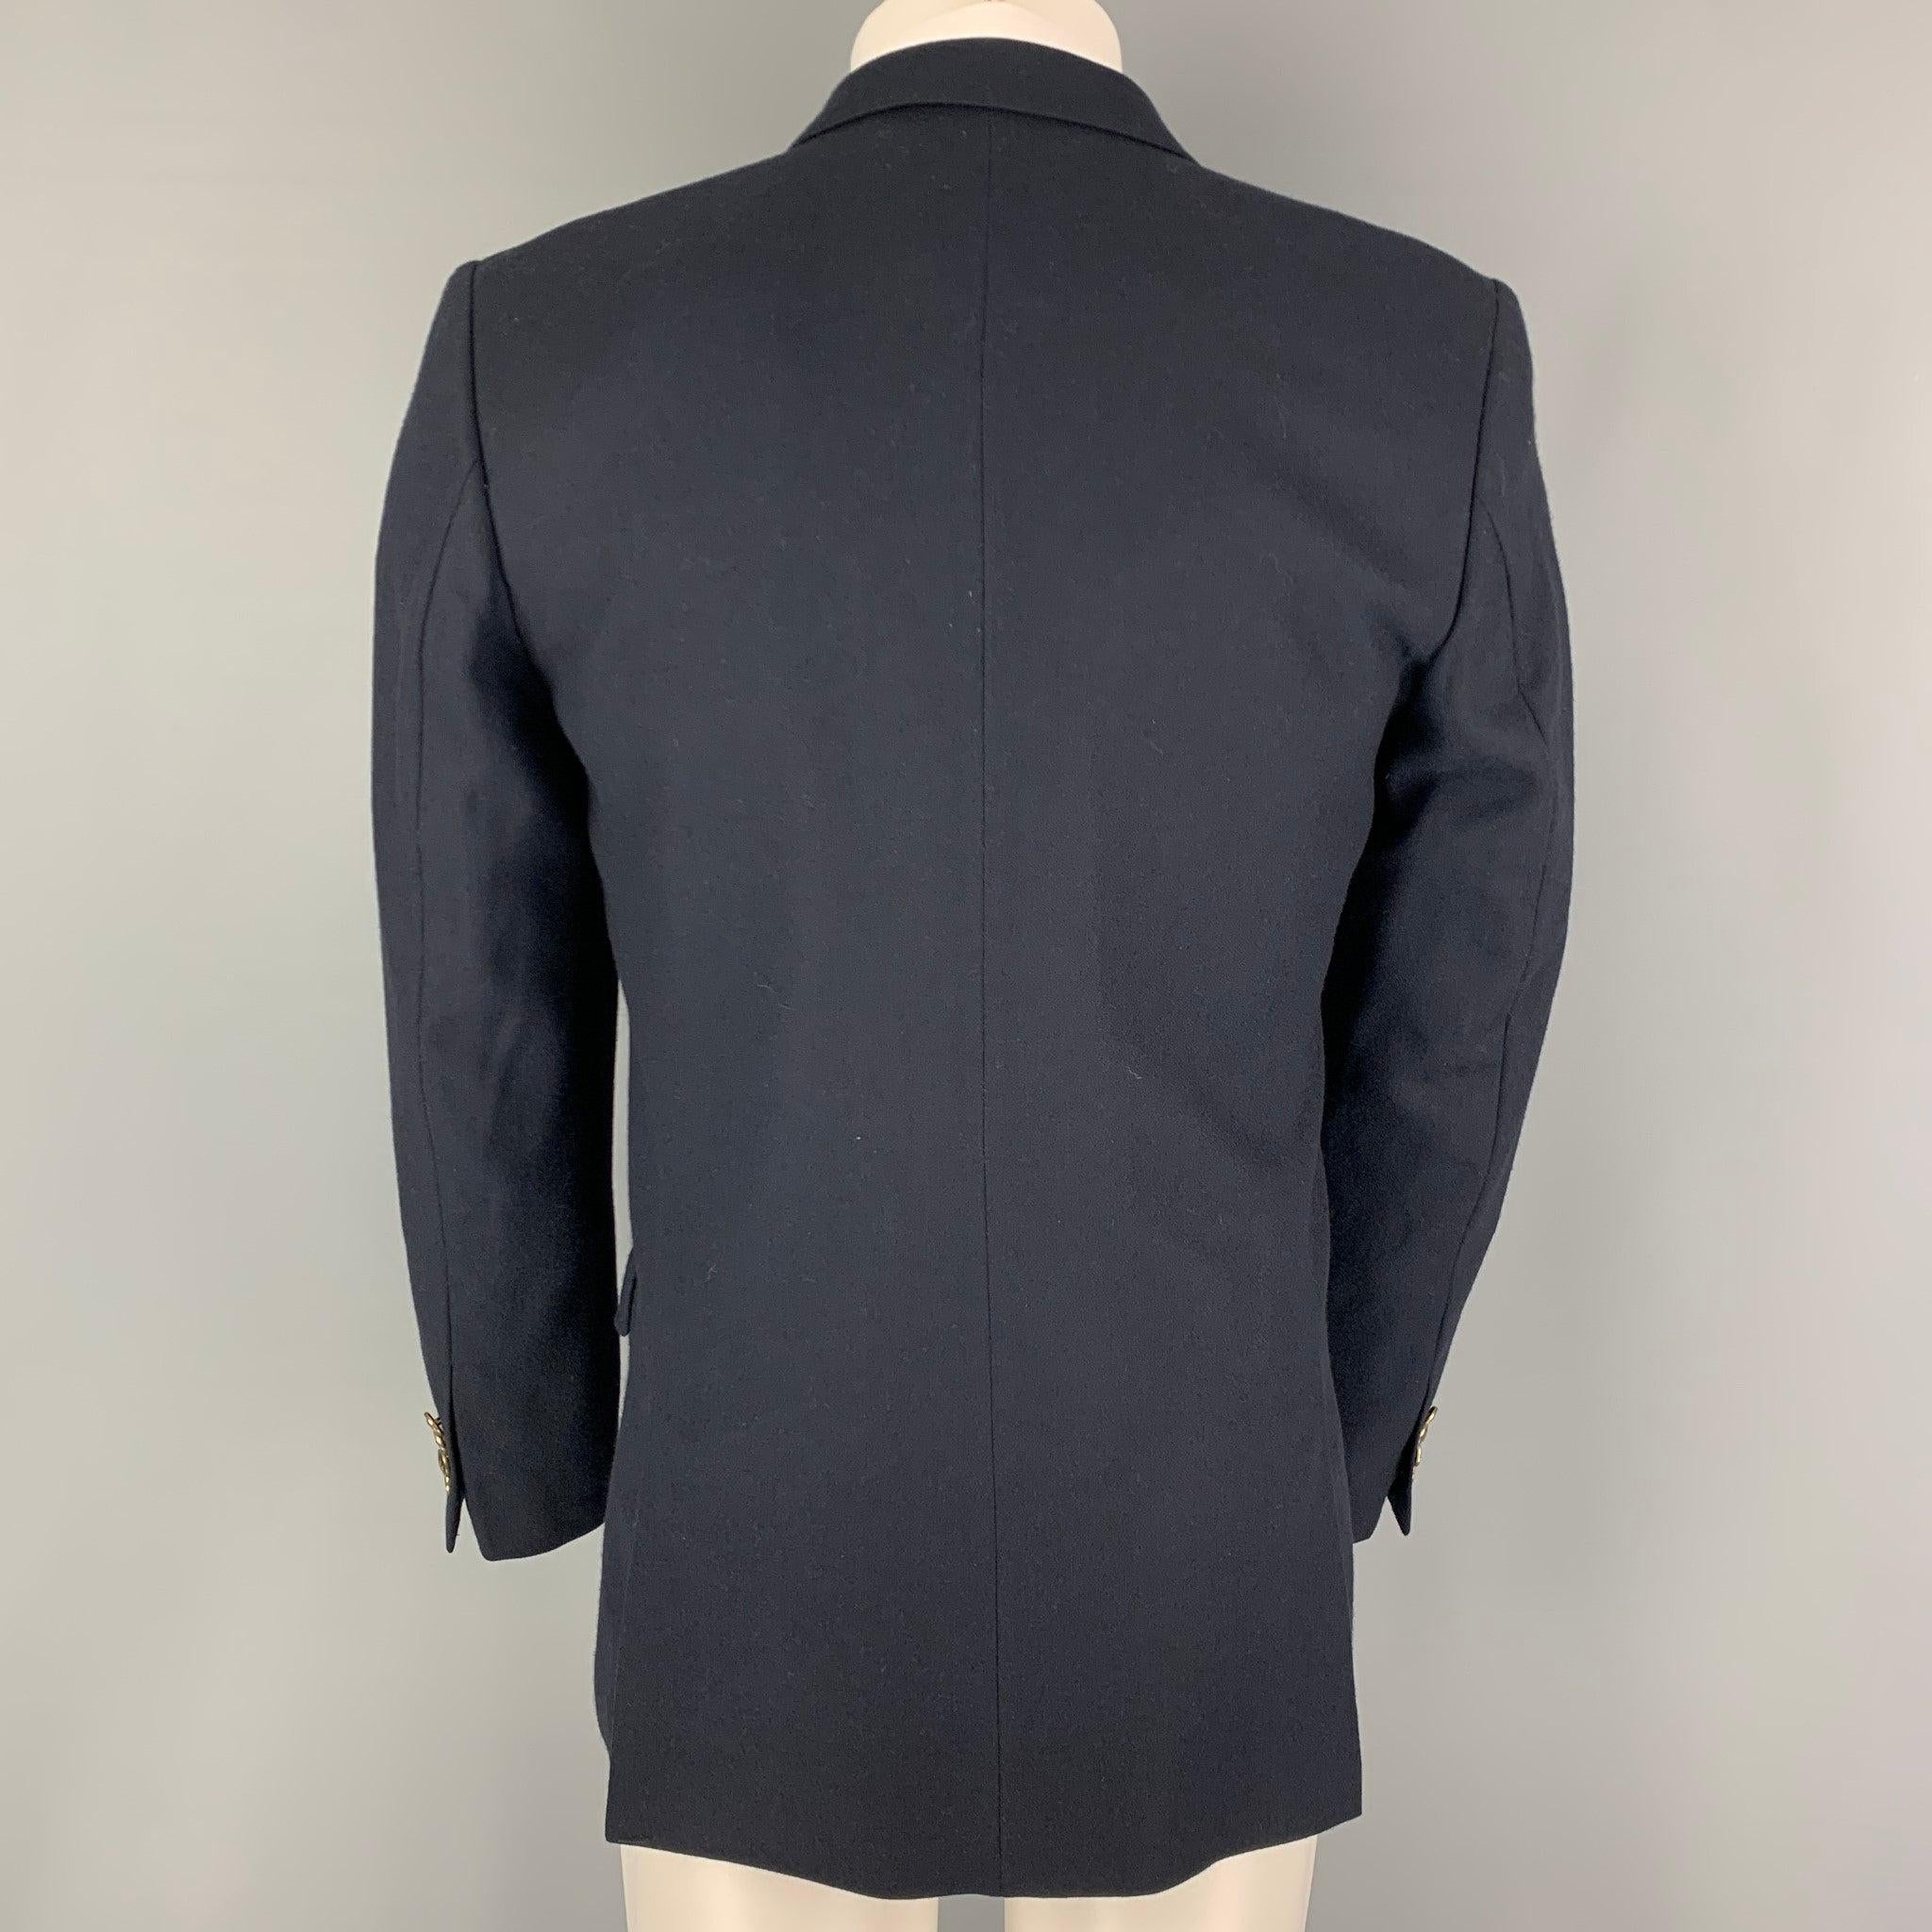 THE KOOPLES Size 40 Navy Cashmere Peak Lapel Sport Coat In Good Condition For Sale In San Francisco, CA